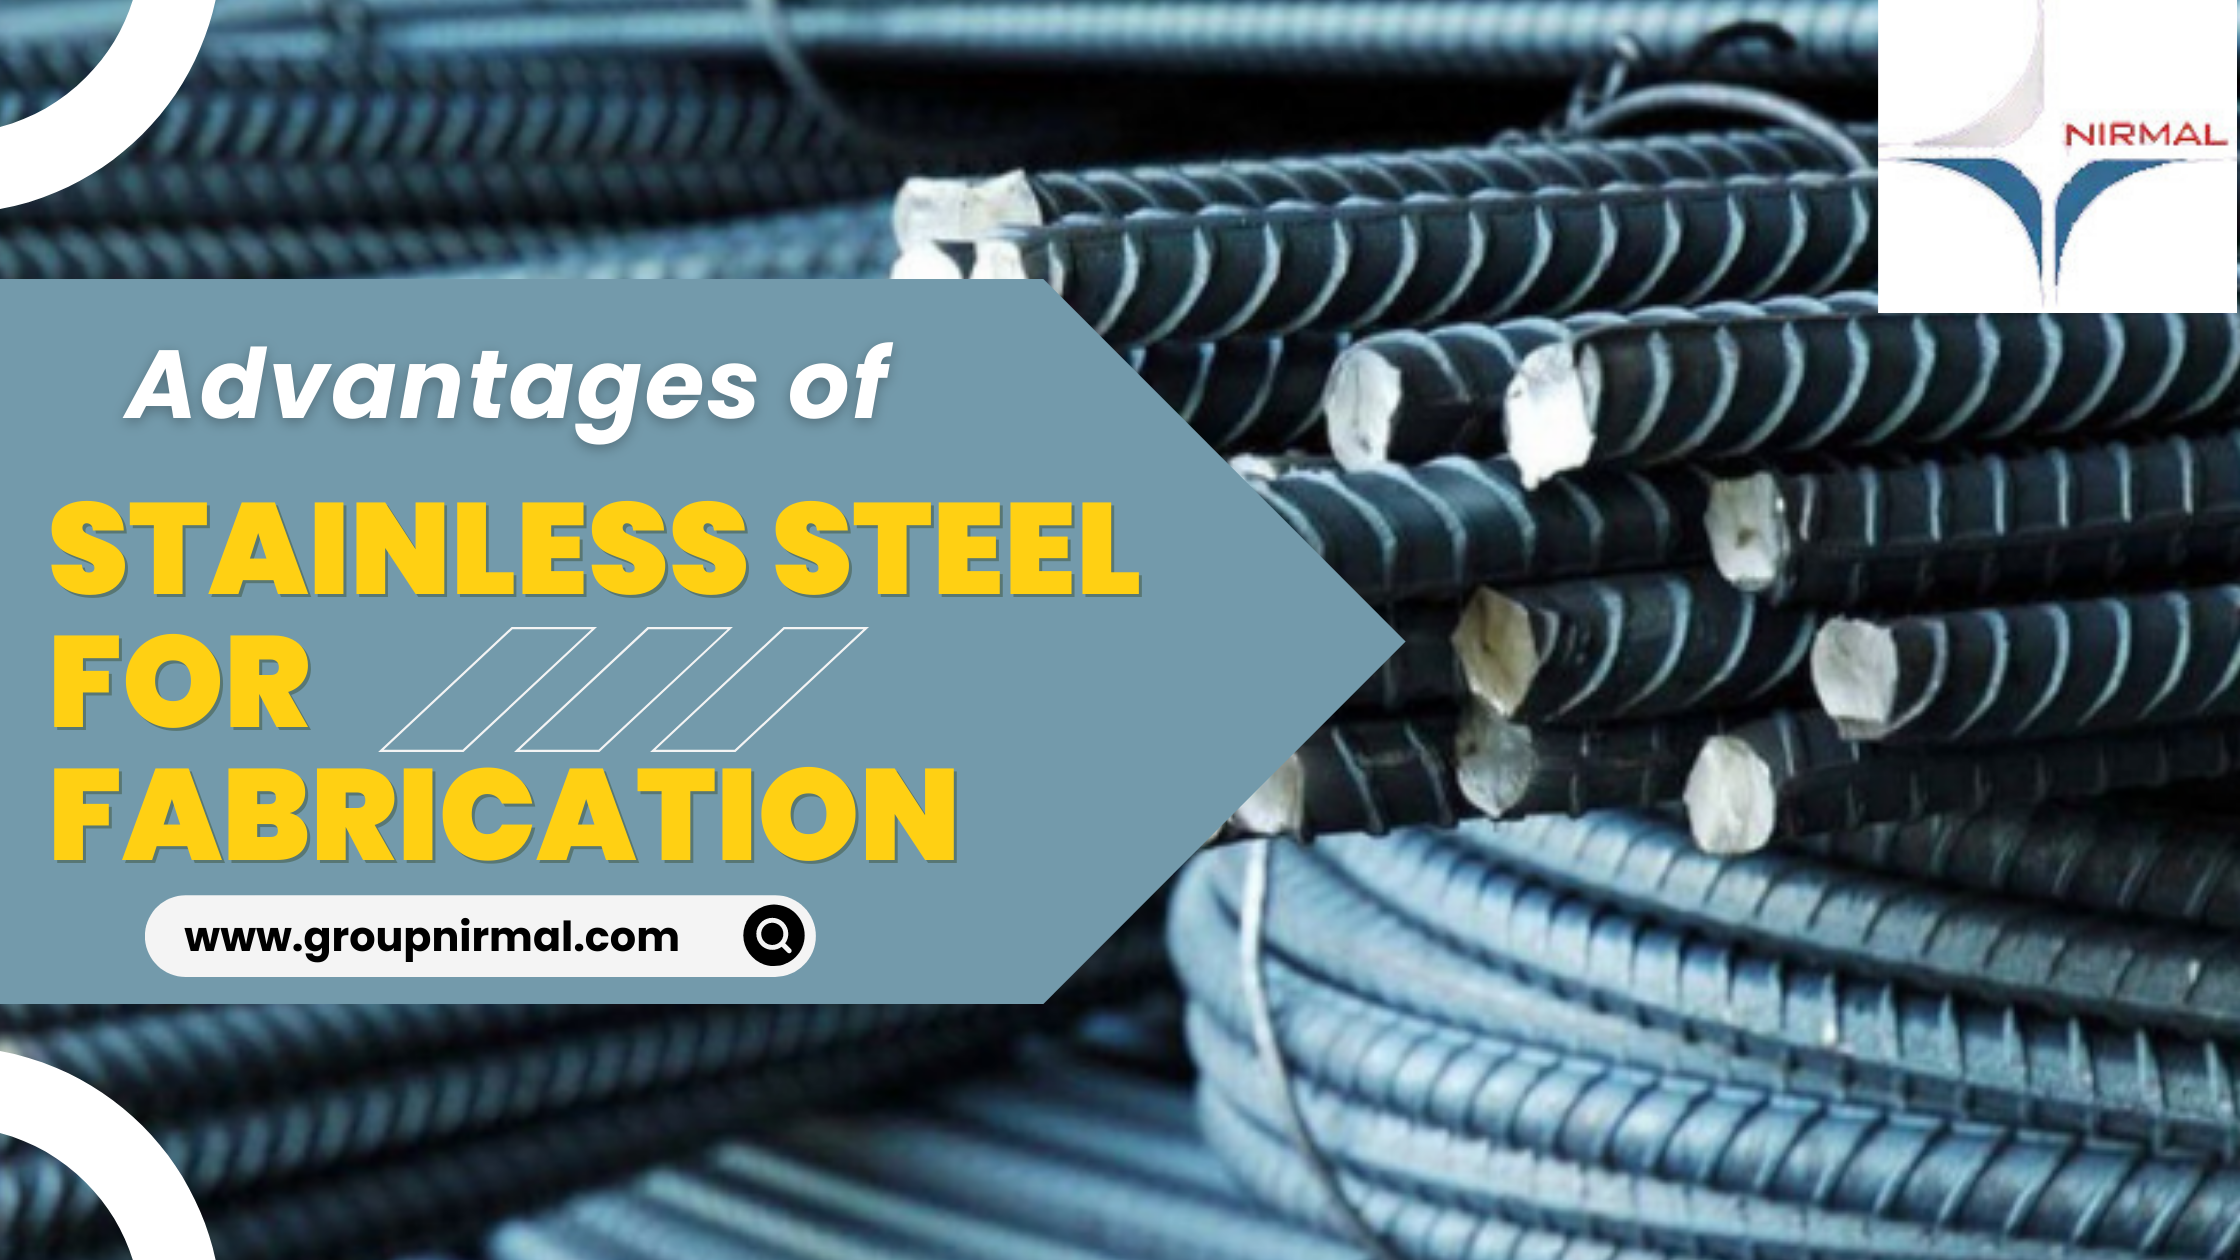 Advantages of Stainless Steel for Fabrication